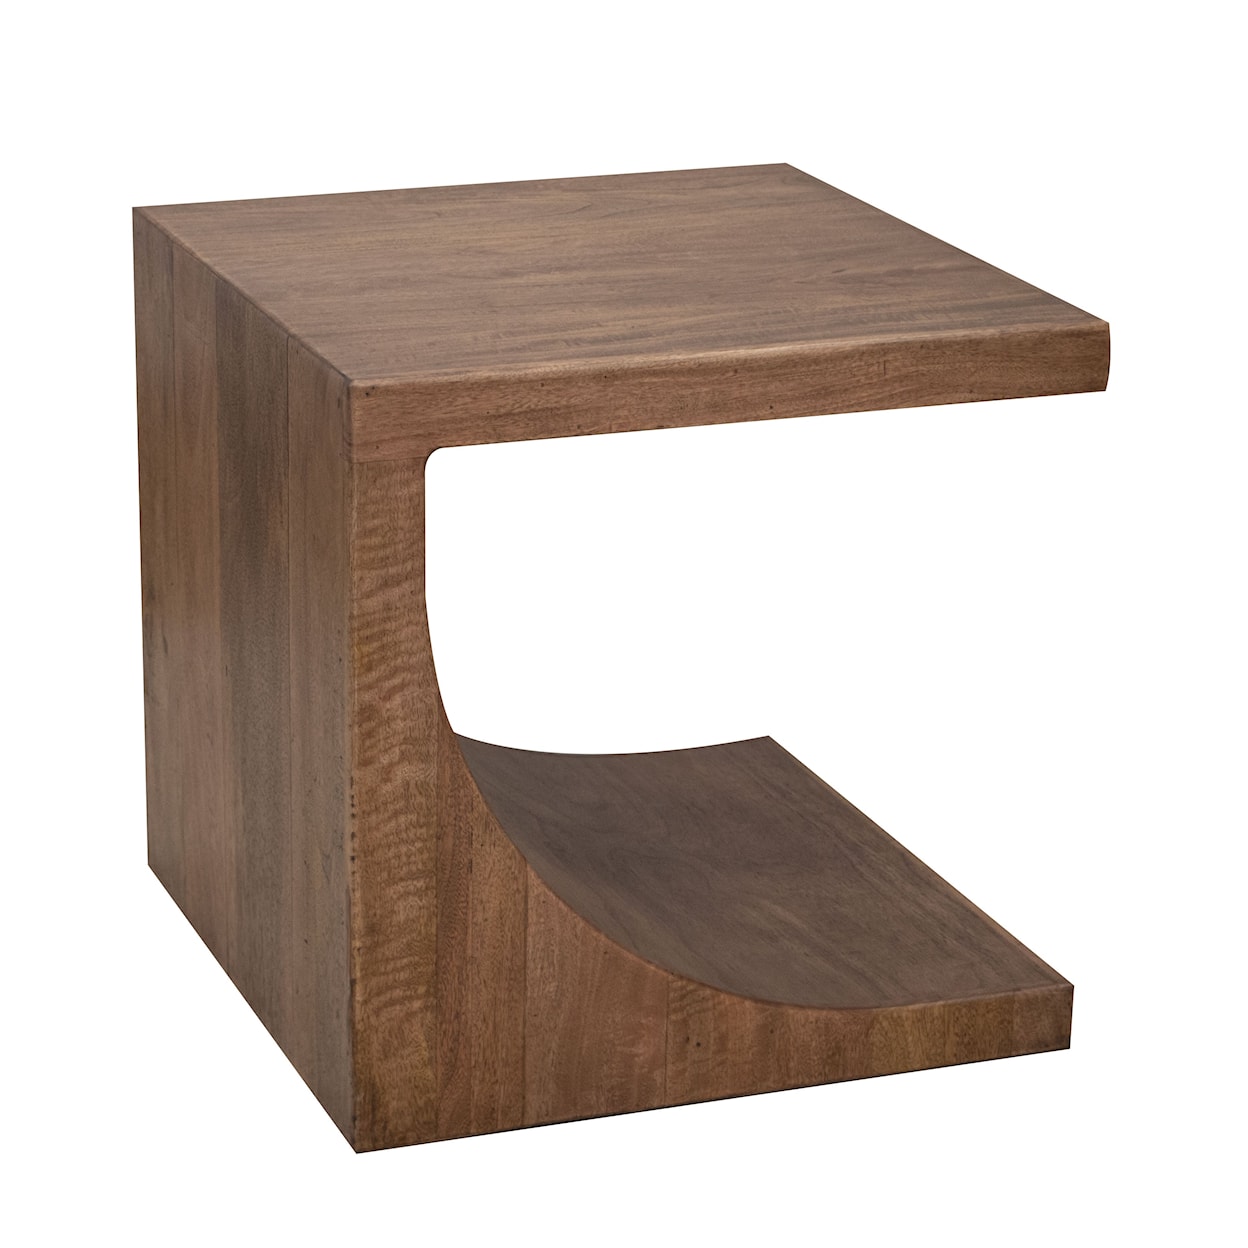 IFD International Furniture Direct Mezquite End Table